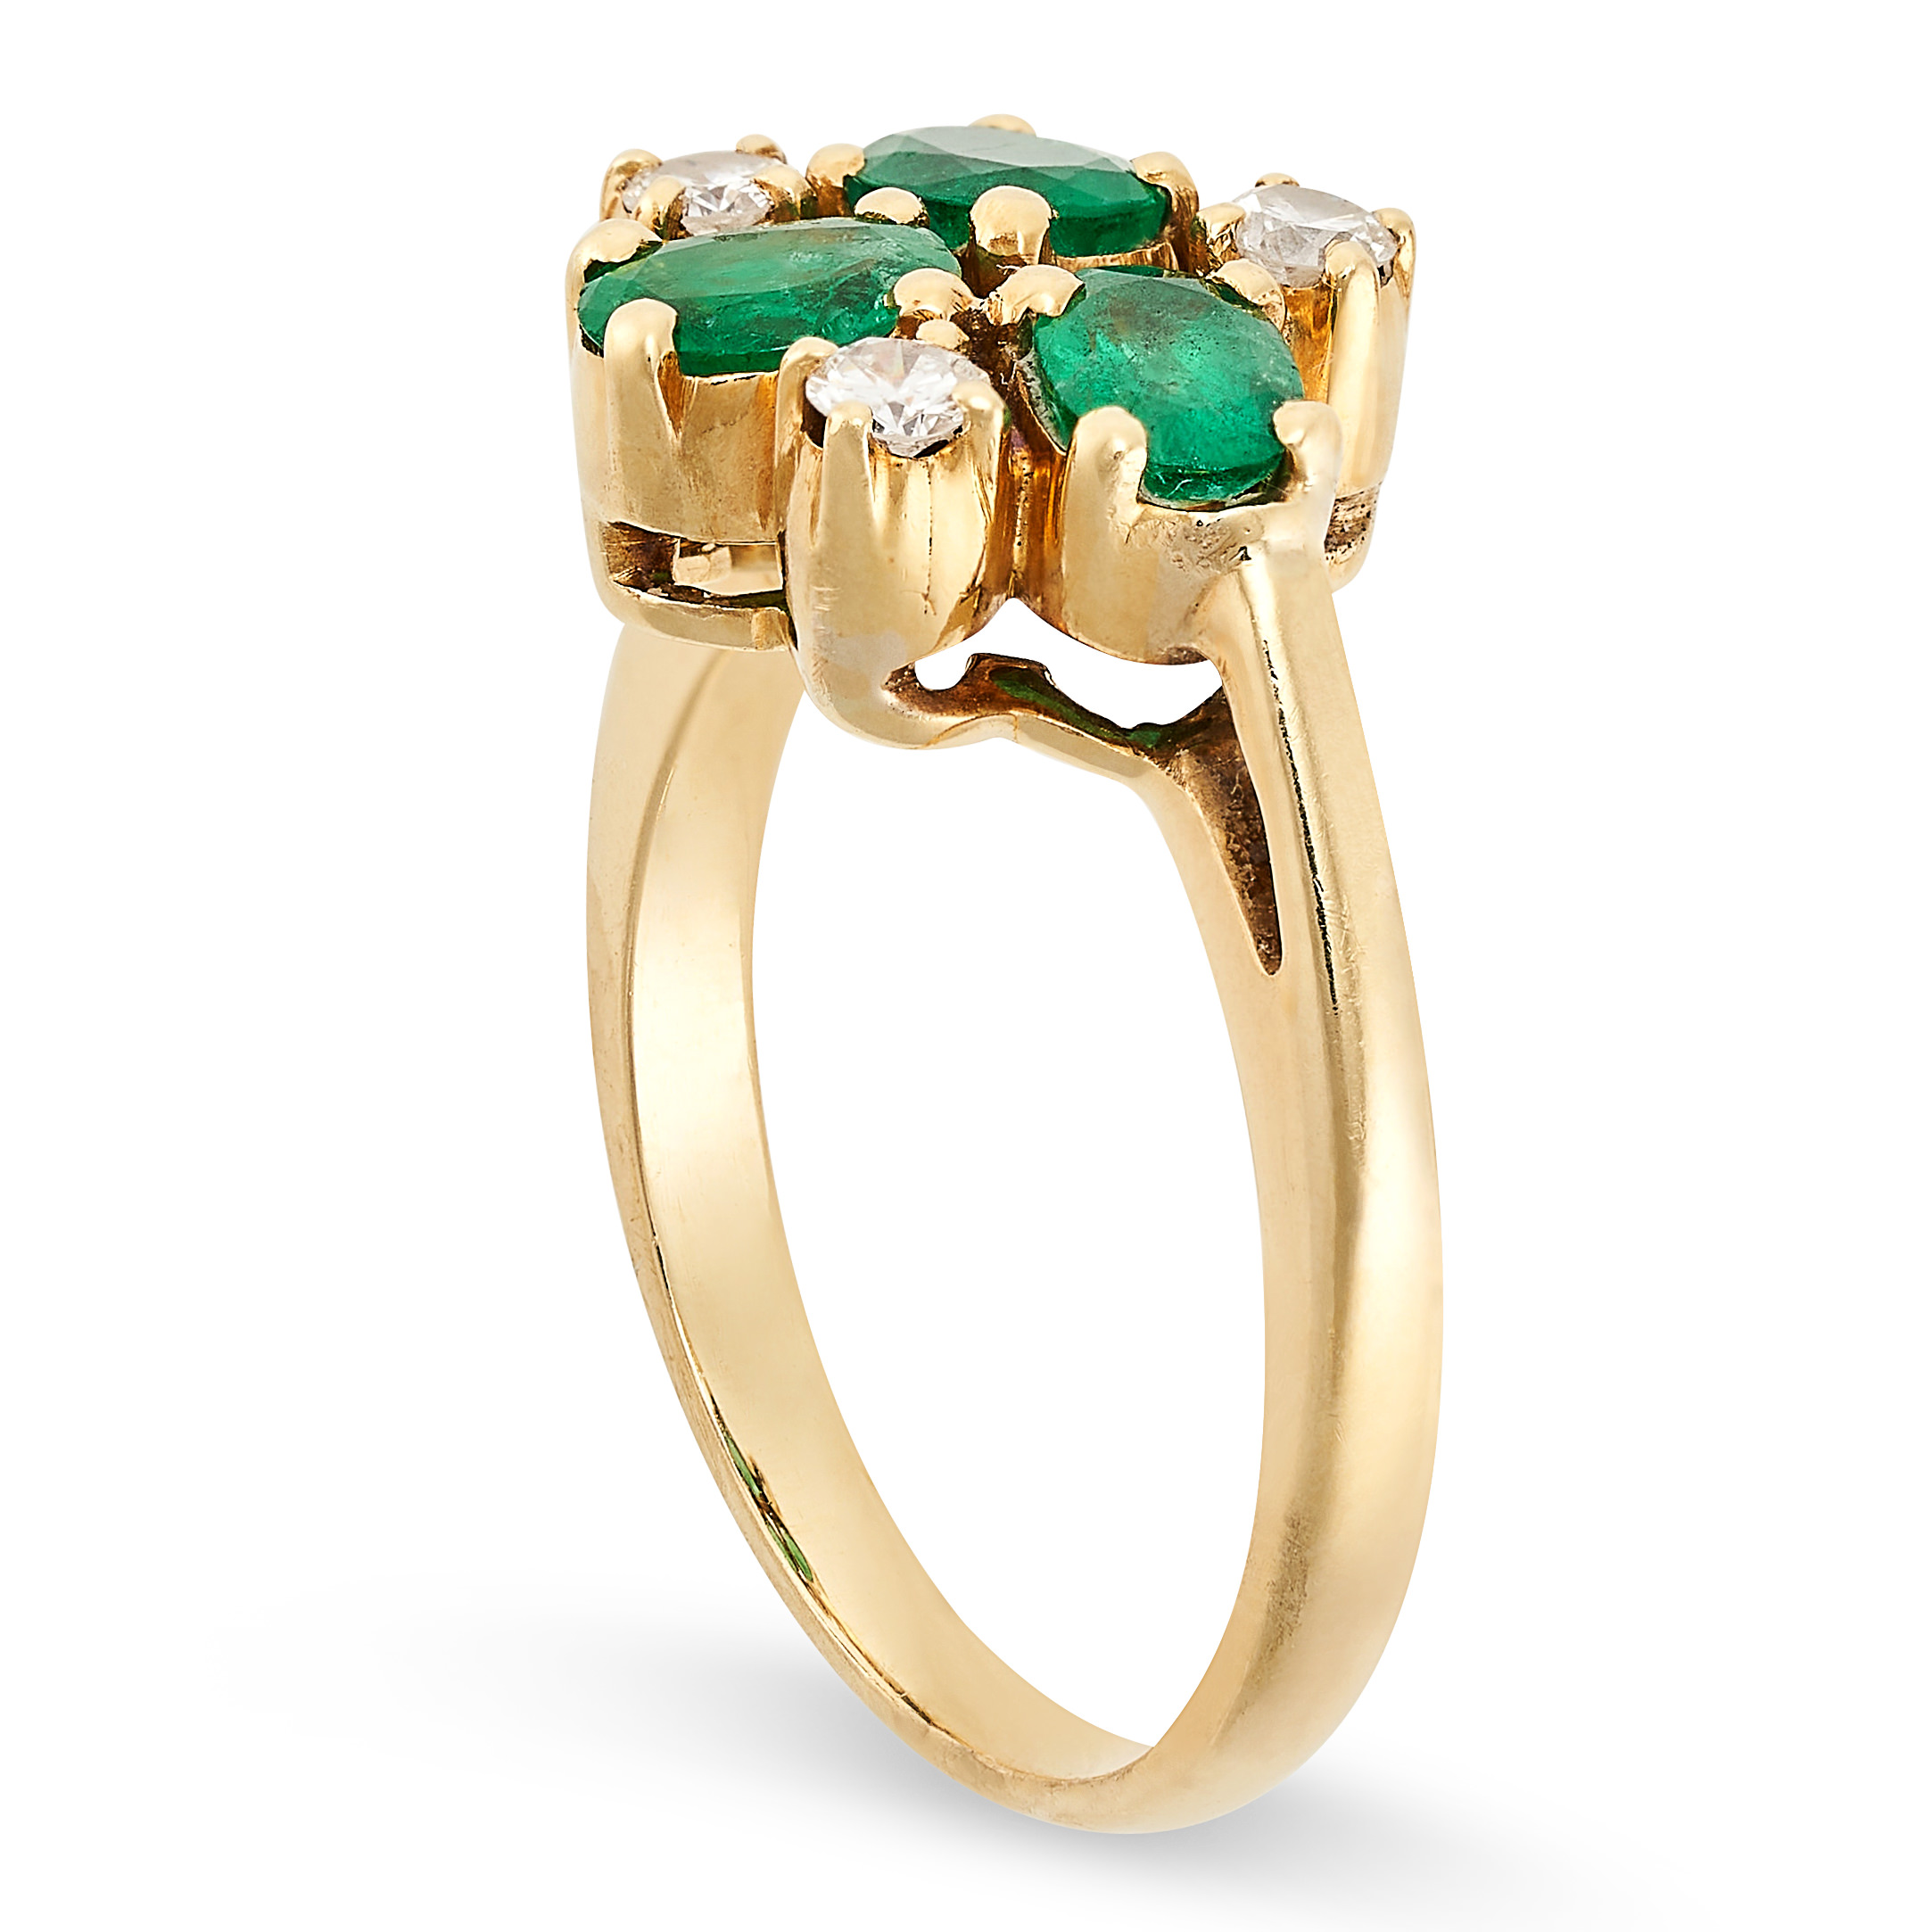 AN EMERALD AND DIAMOND RING set with three oval cut emeralds and three round brilliant cut diamonds, - Image 2 of 2